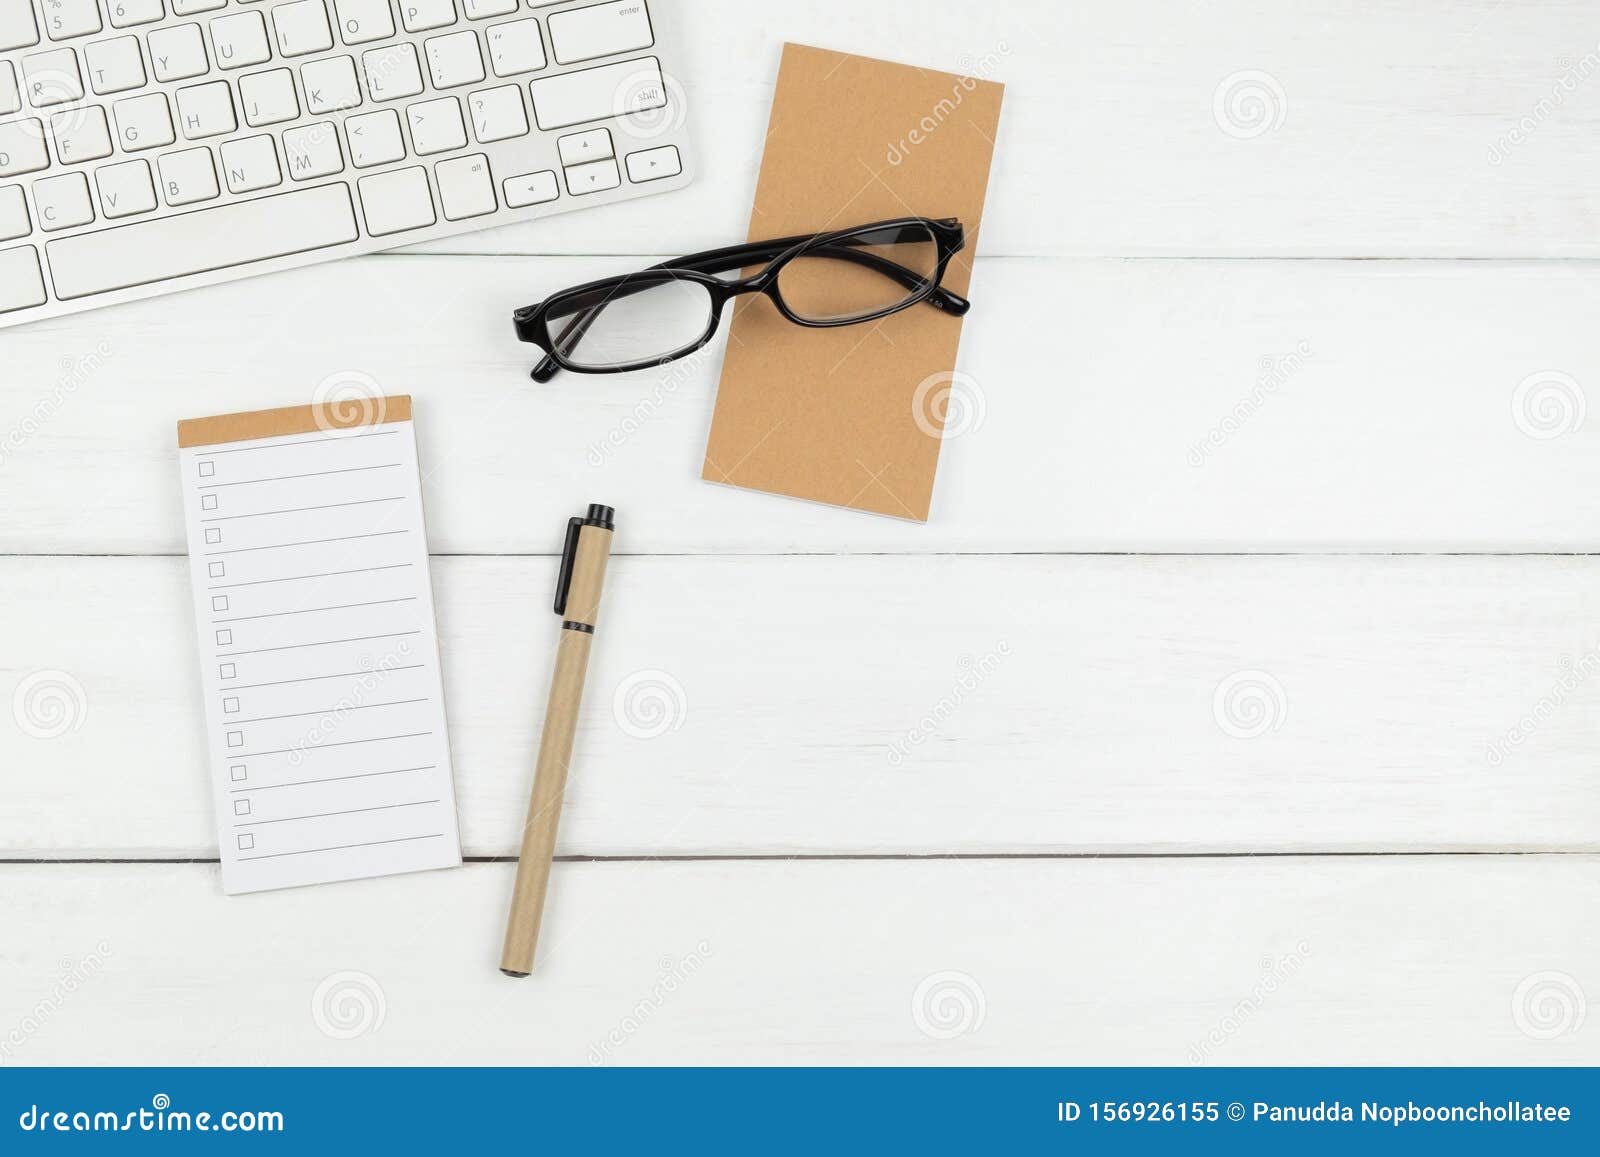 Top View Of To Do List Paper On Office Desk Stock Image Image Of